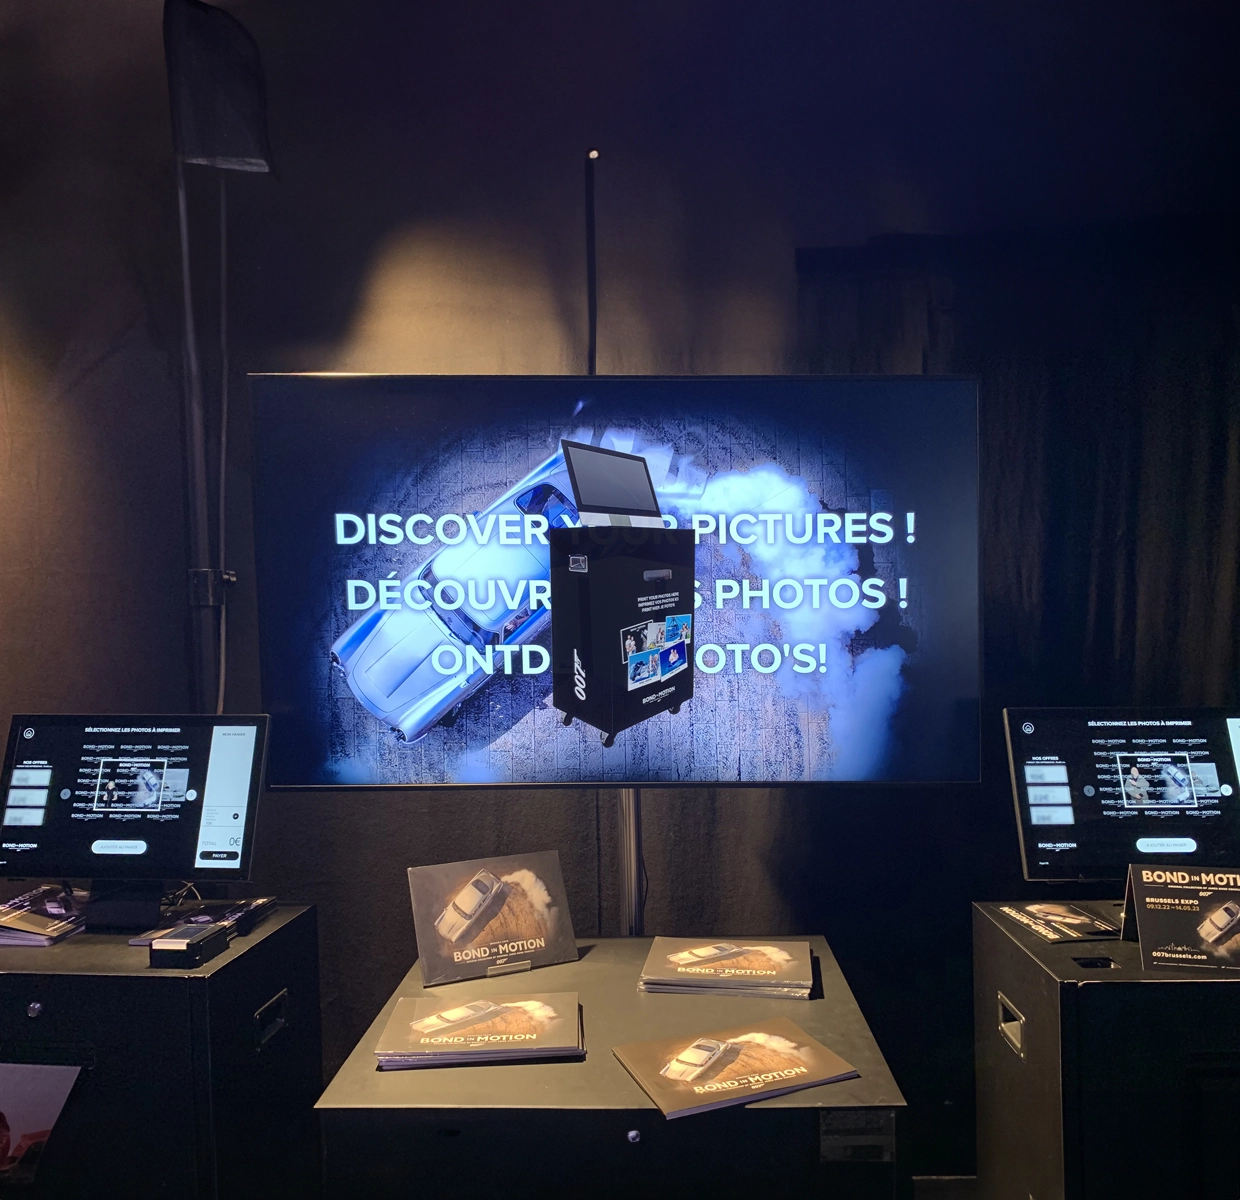 Interactive photo stations at the 'Bond in Motion' exhibition displaying the 'DISCOVER YOUR PICTURES!' screen, inviting visitors to print their photos